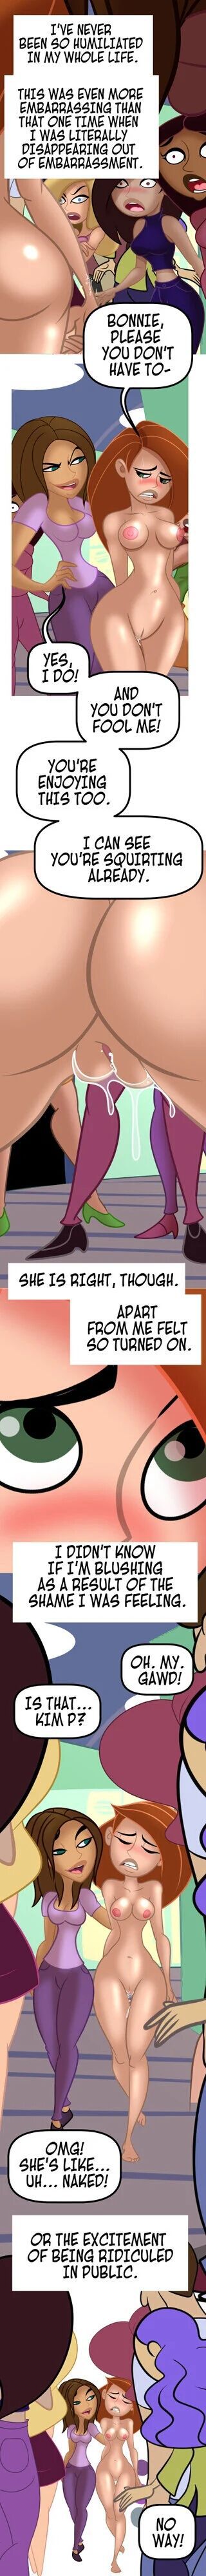 Kinky Possible - A Villain's Bitch Remastered (Kim Possible) [Tease Comix] - 4 - ongoing - english 4